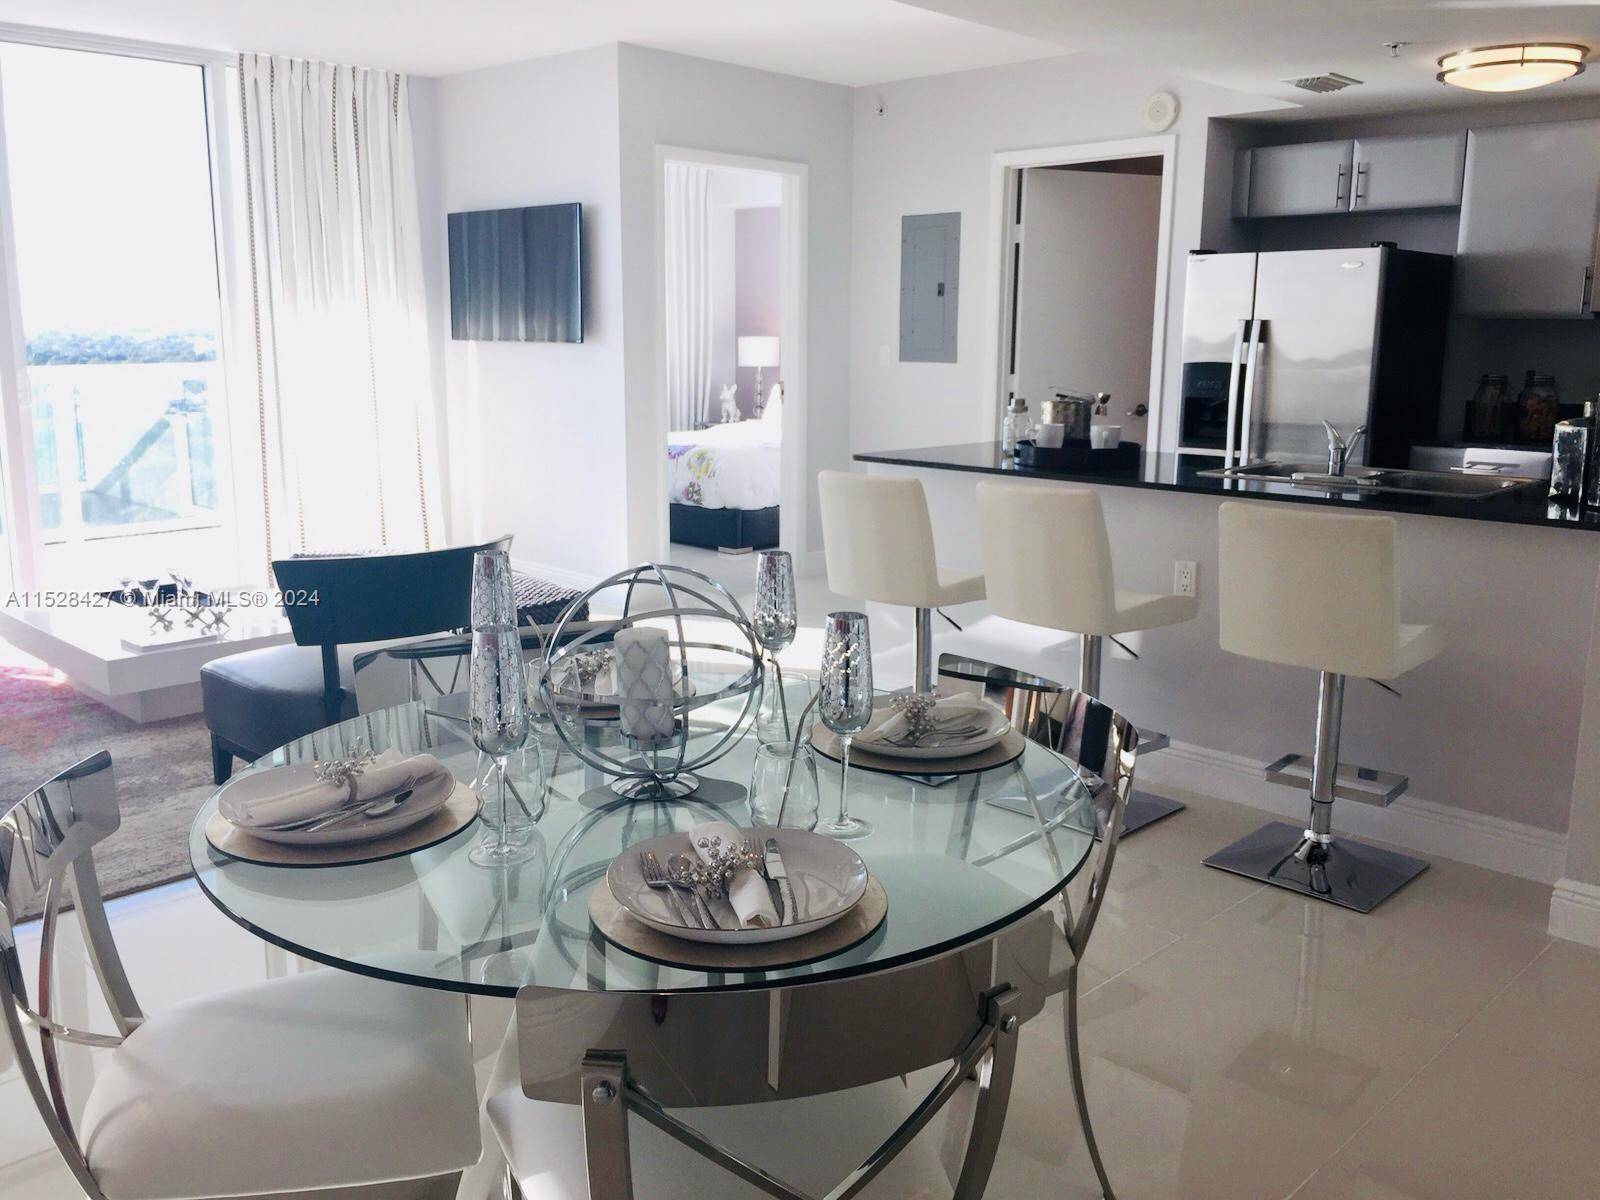 Luxury 2 bedroom 2 baths condo features open floor plan with spectacular city views, spacious balcony, stainless steel kitchen appliances and much more.